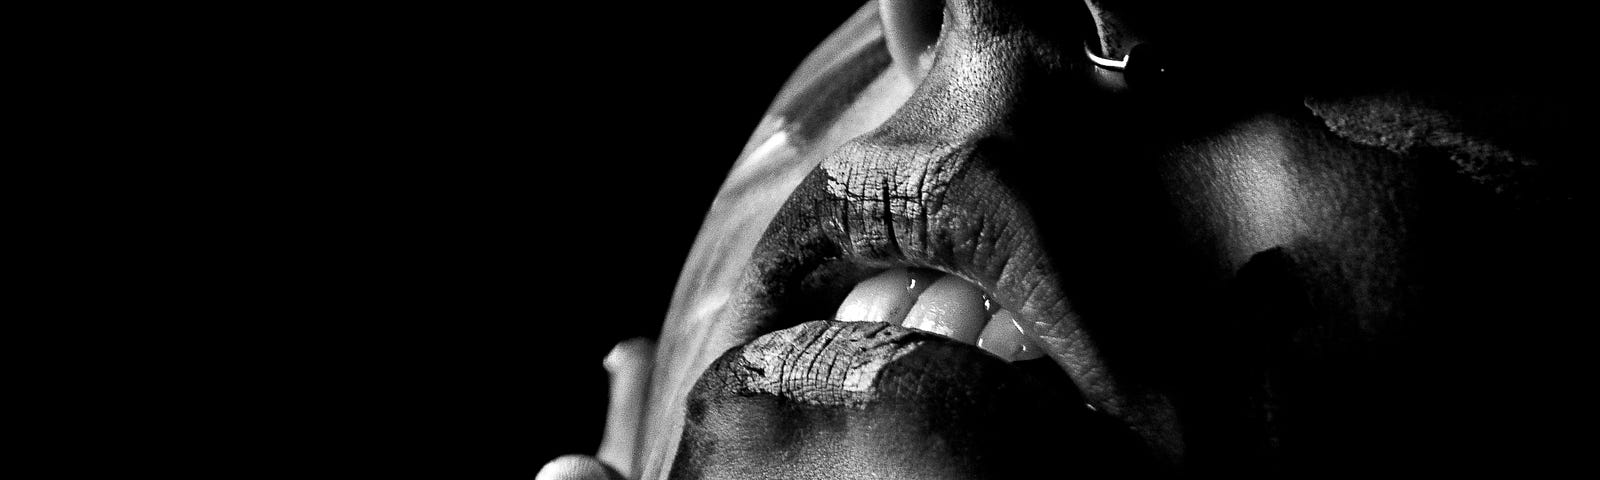 Black and white photo of a very sensual woman’s mouth.